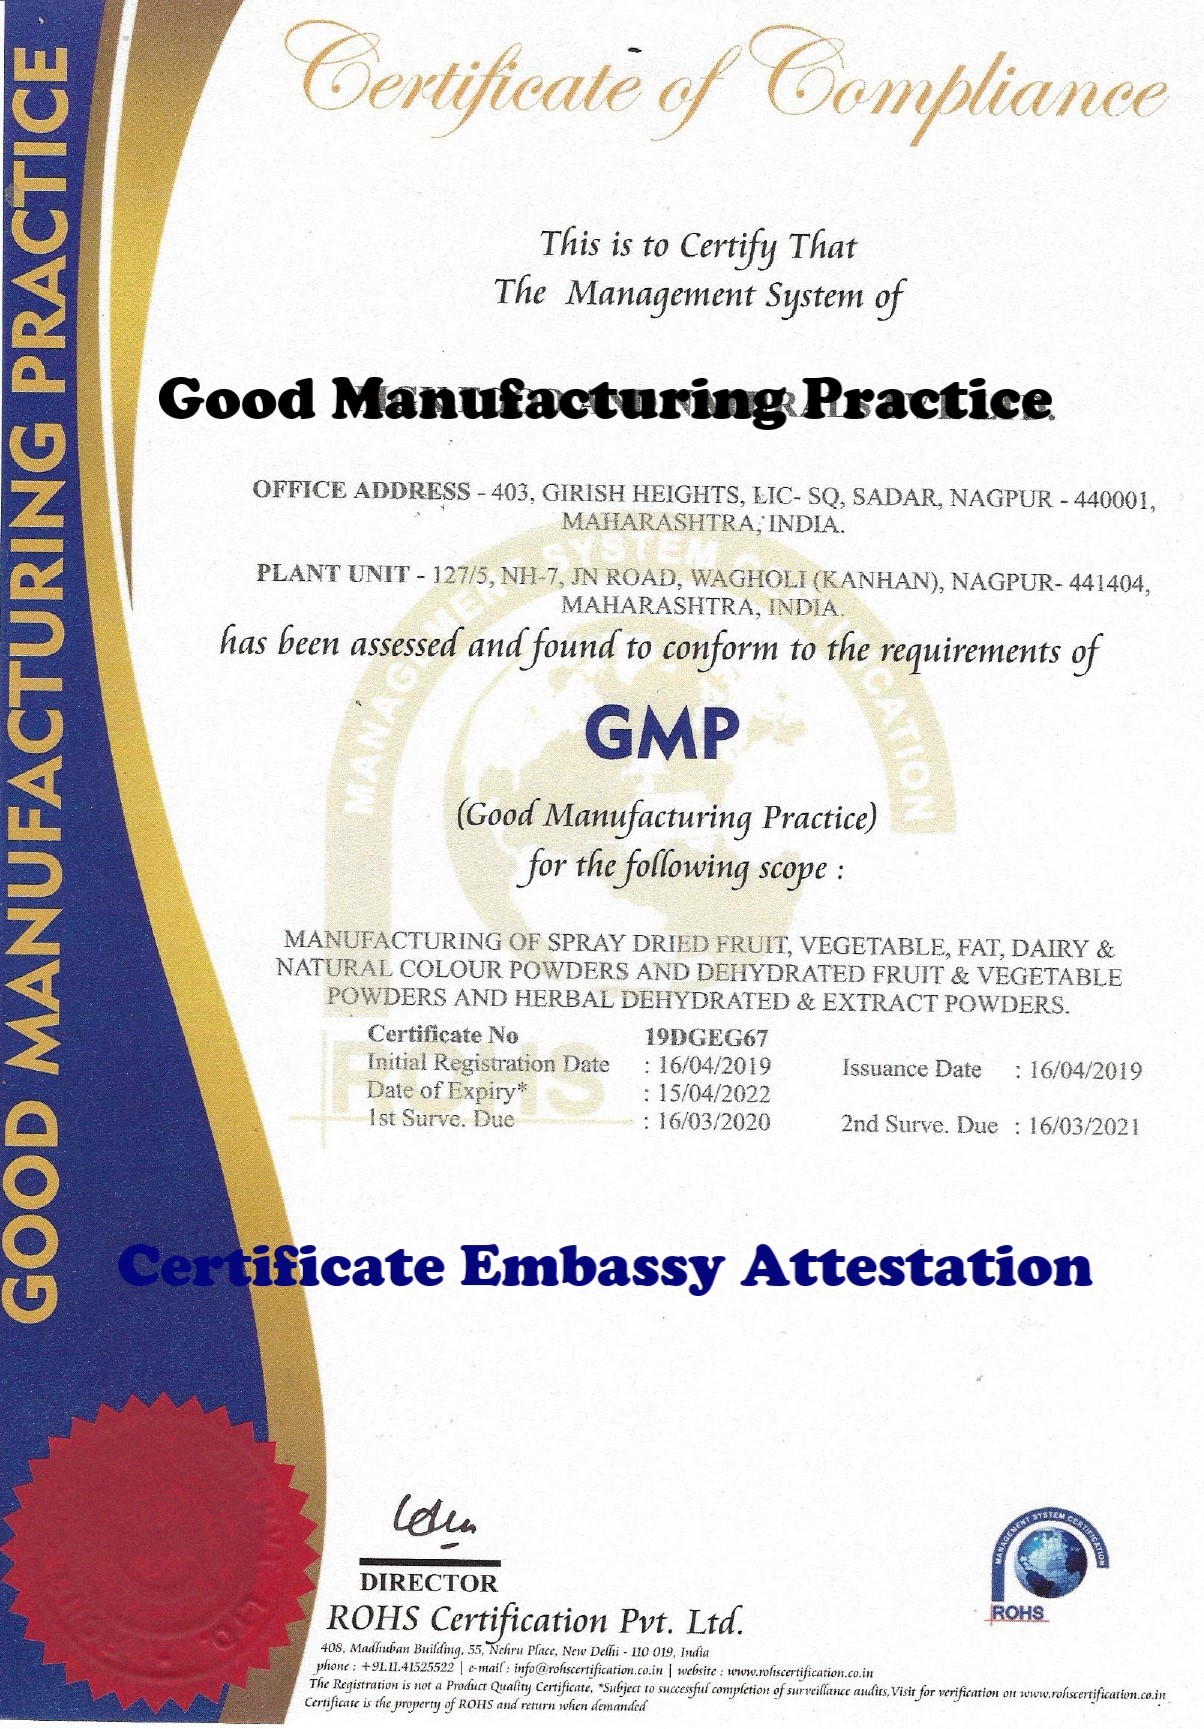 GMP Certificate Attestation from Embassy